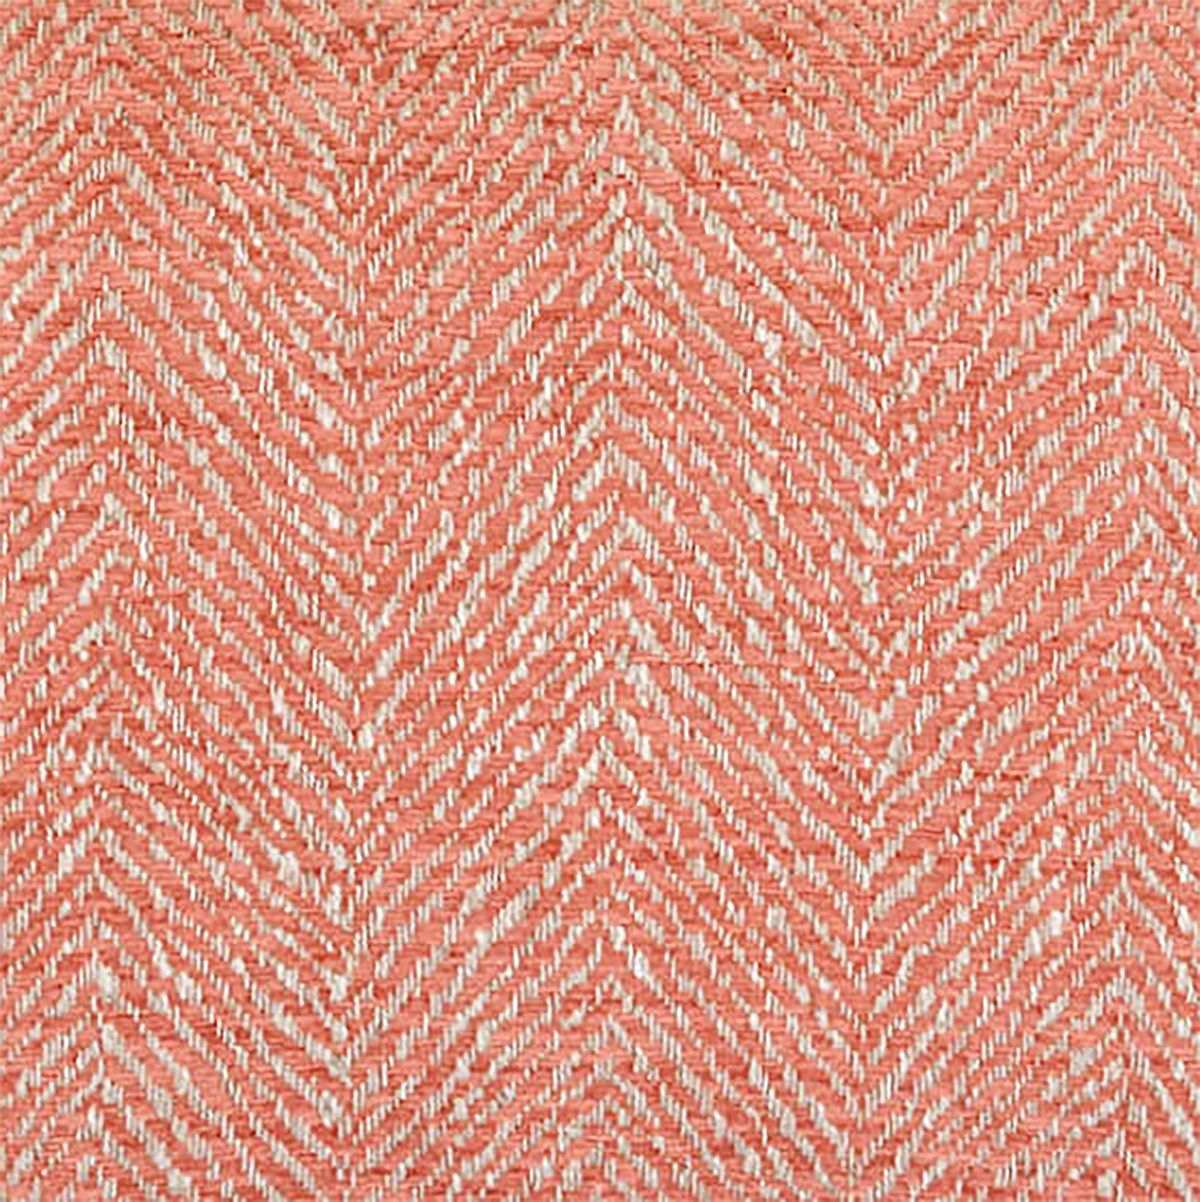 Oryx Coral Fabric by Voyage Maison